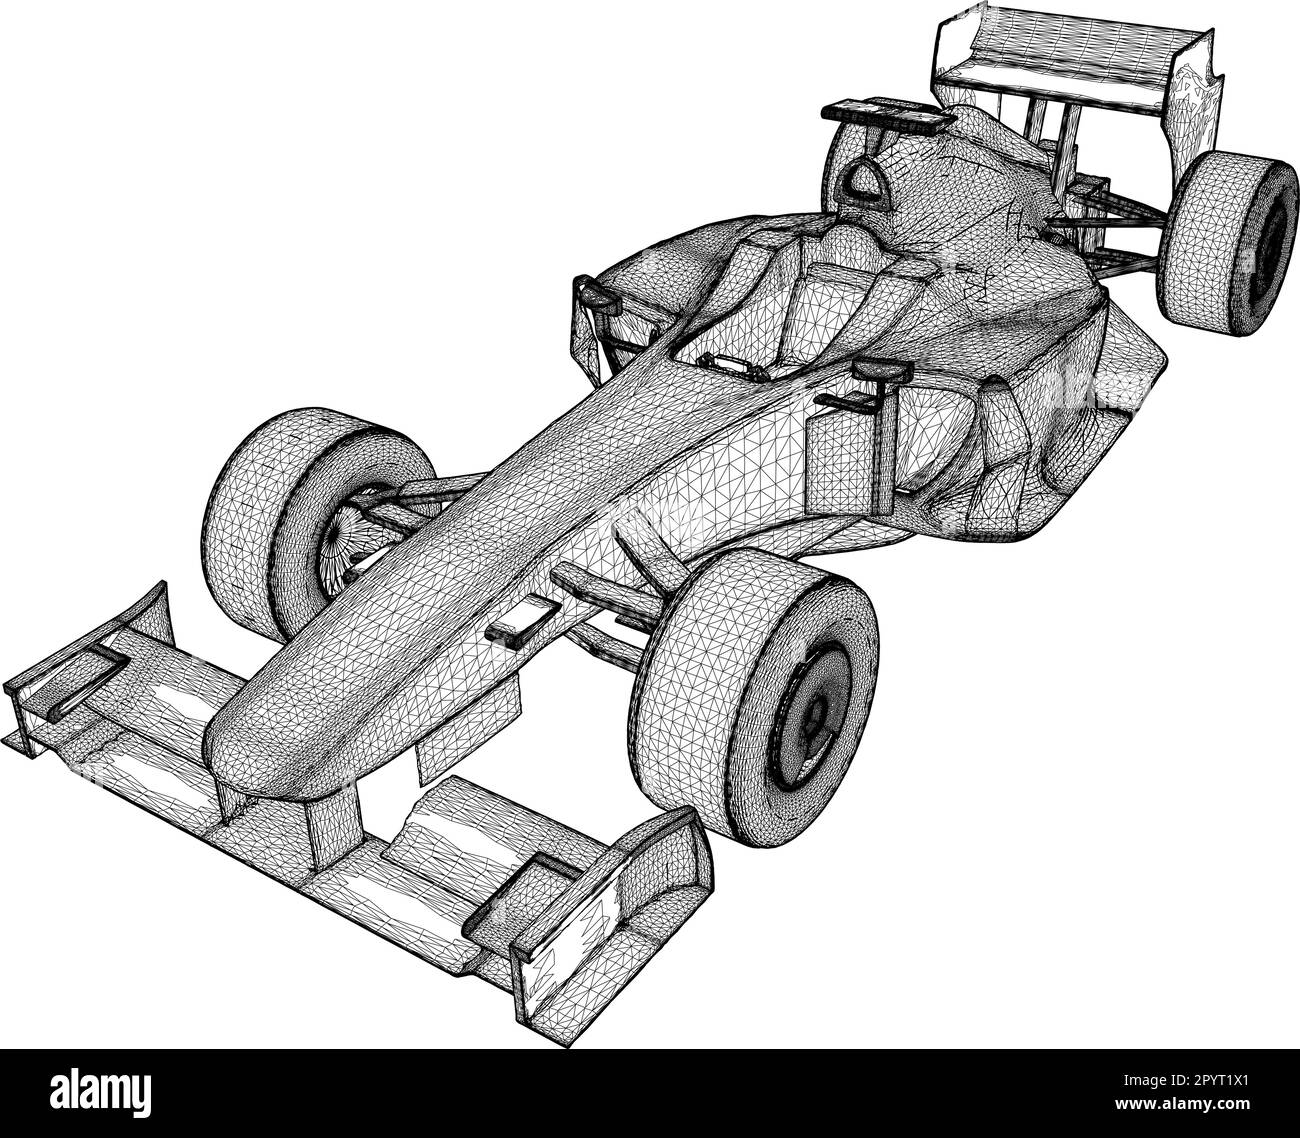 3d Rendering of a Formula Race Car in Black and White Color, Sport